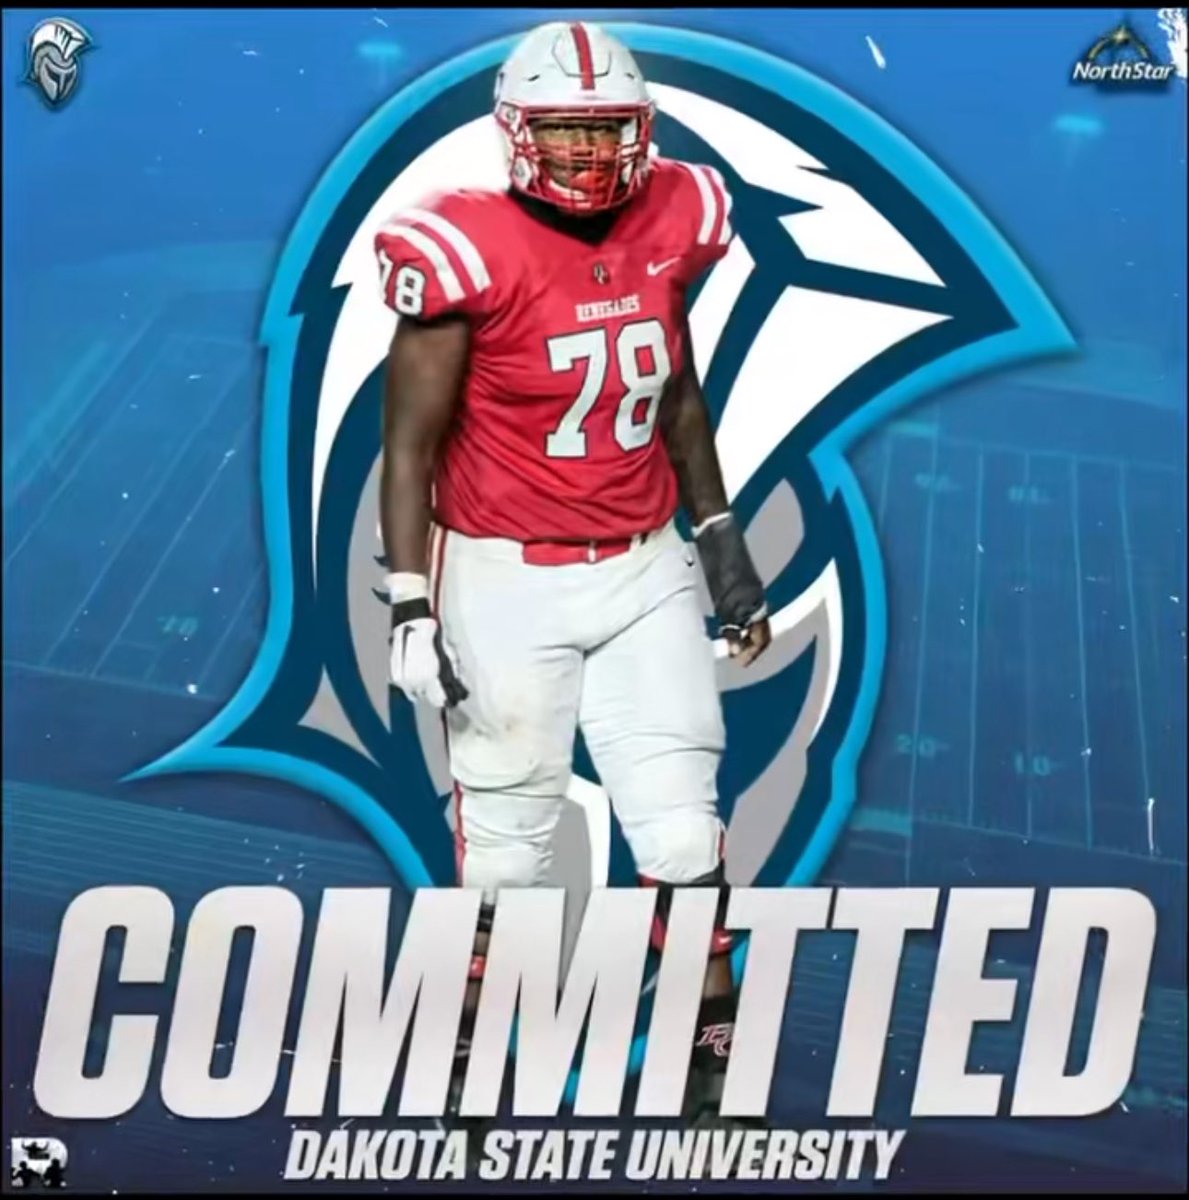 Congratulations to Renegade Offensive Tackle Thomas Lett for his commitment to Dakota State University to continue his academic/athletic career. #weareBC #Renegadefootball